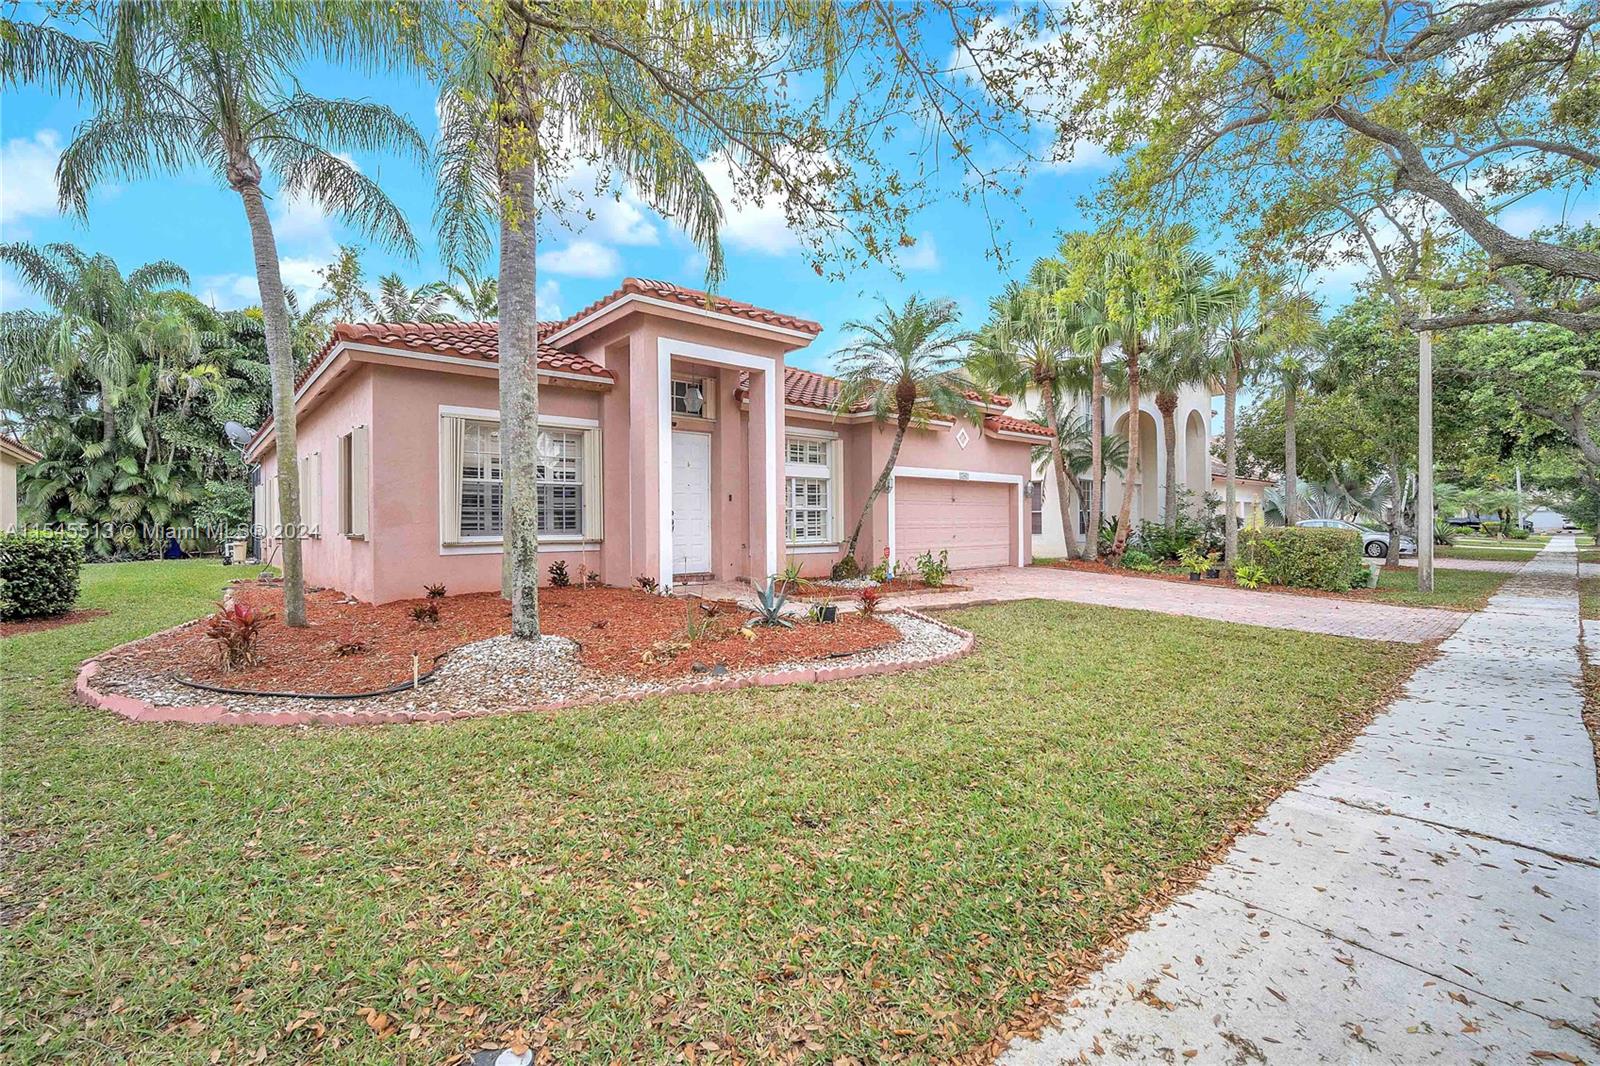 17062 Nw 16th St St, Pembroke Pines, Miami-Dade County, Florida - 4 Bedrooms  
2 Bathrooms - 